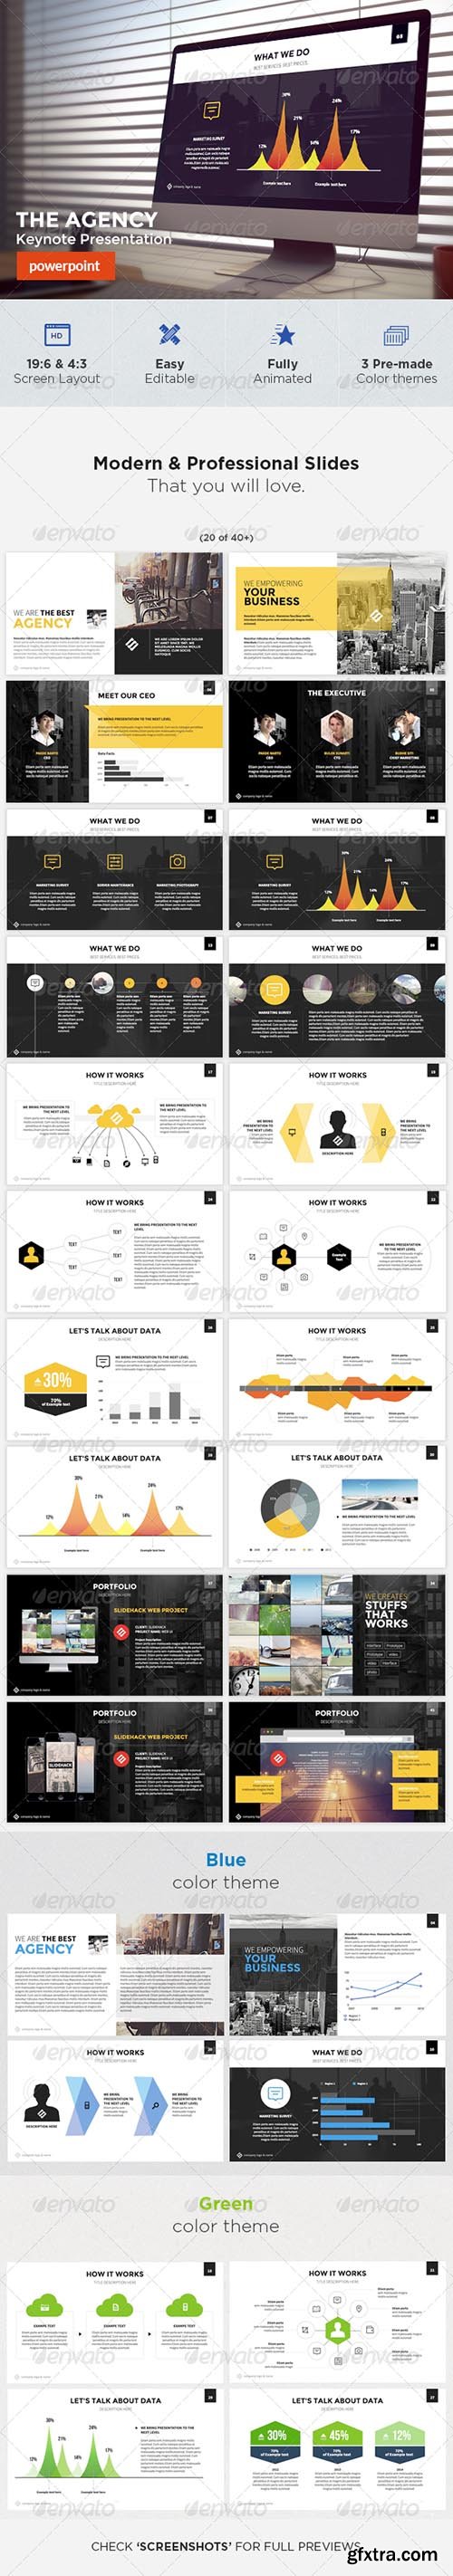 GraphicRiver - The Agency - Powerpoint Template 8004257